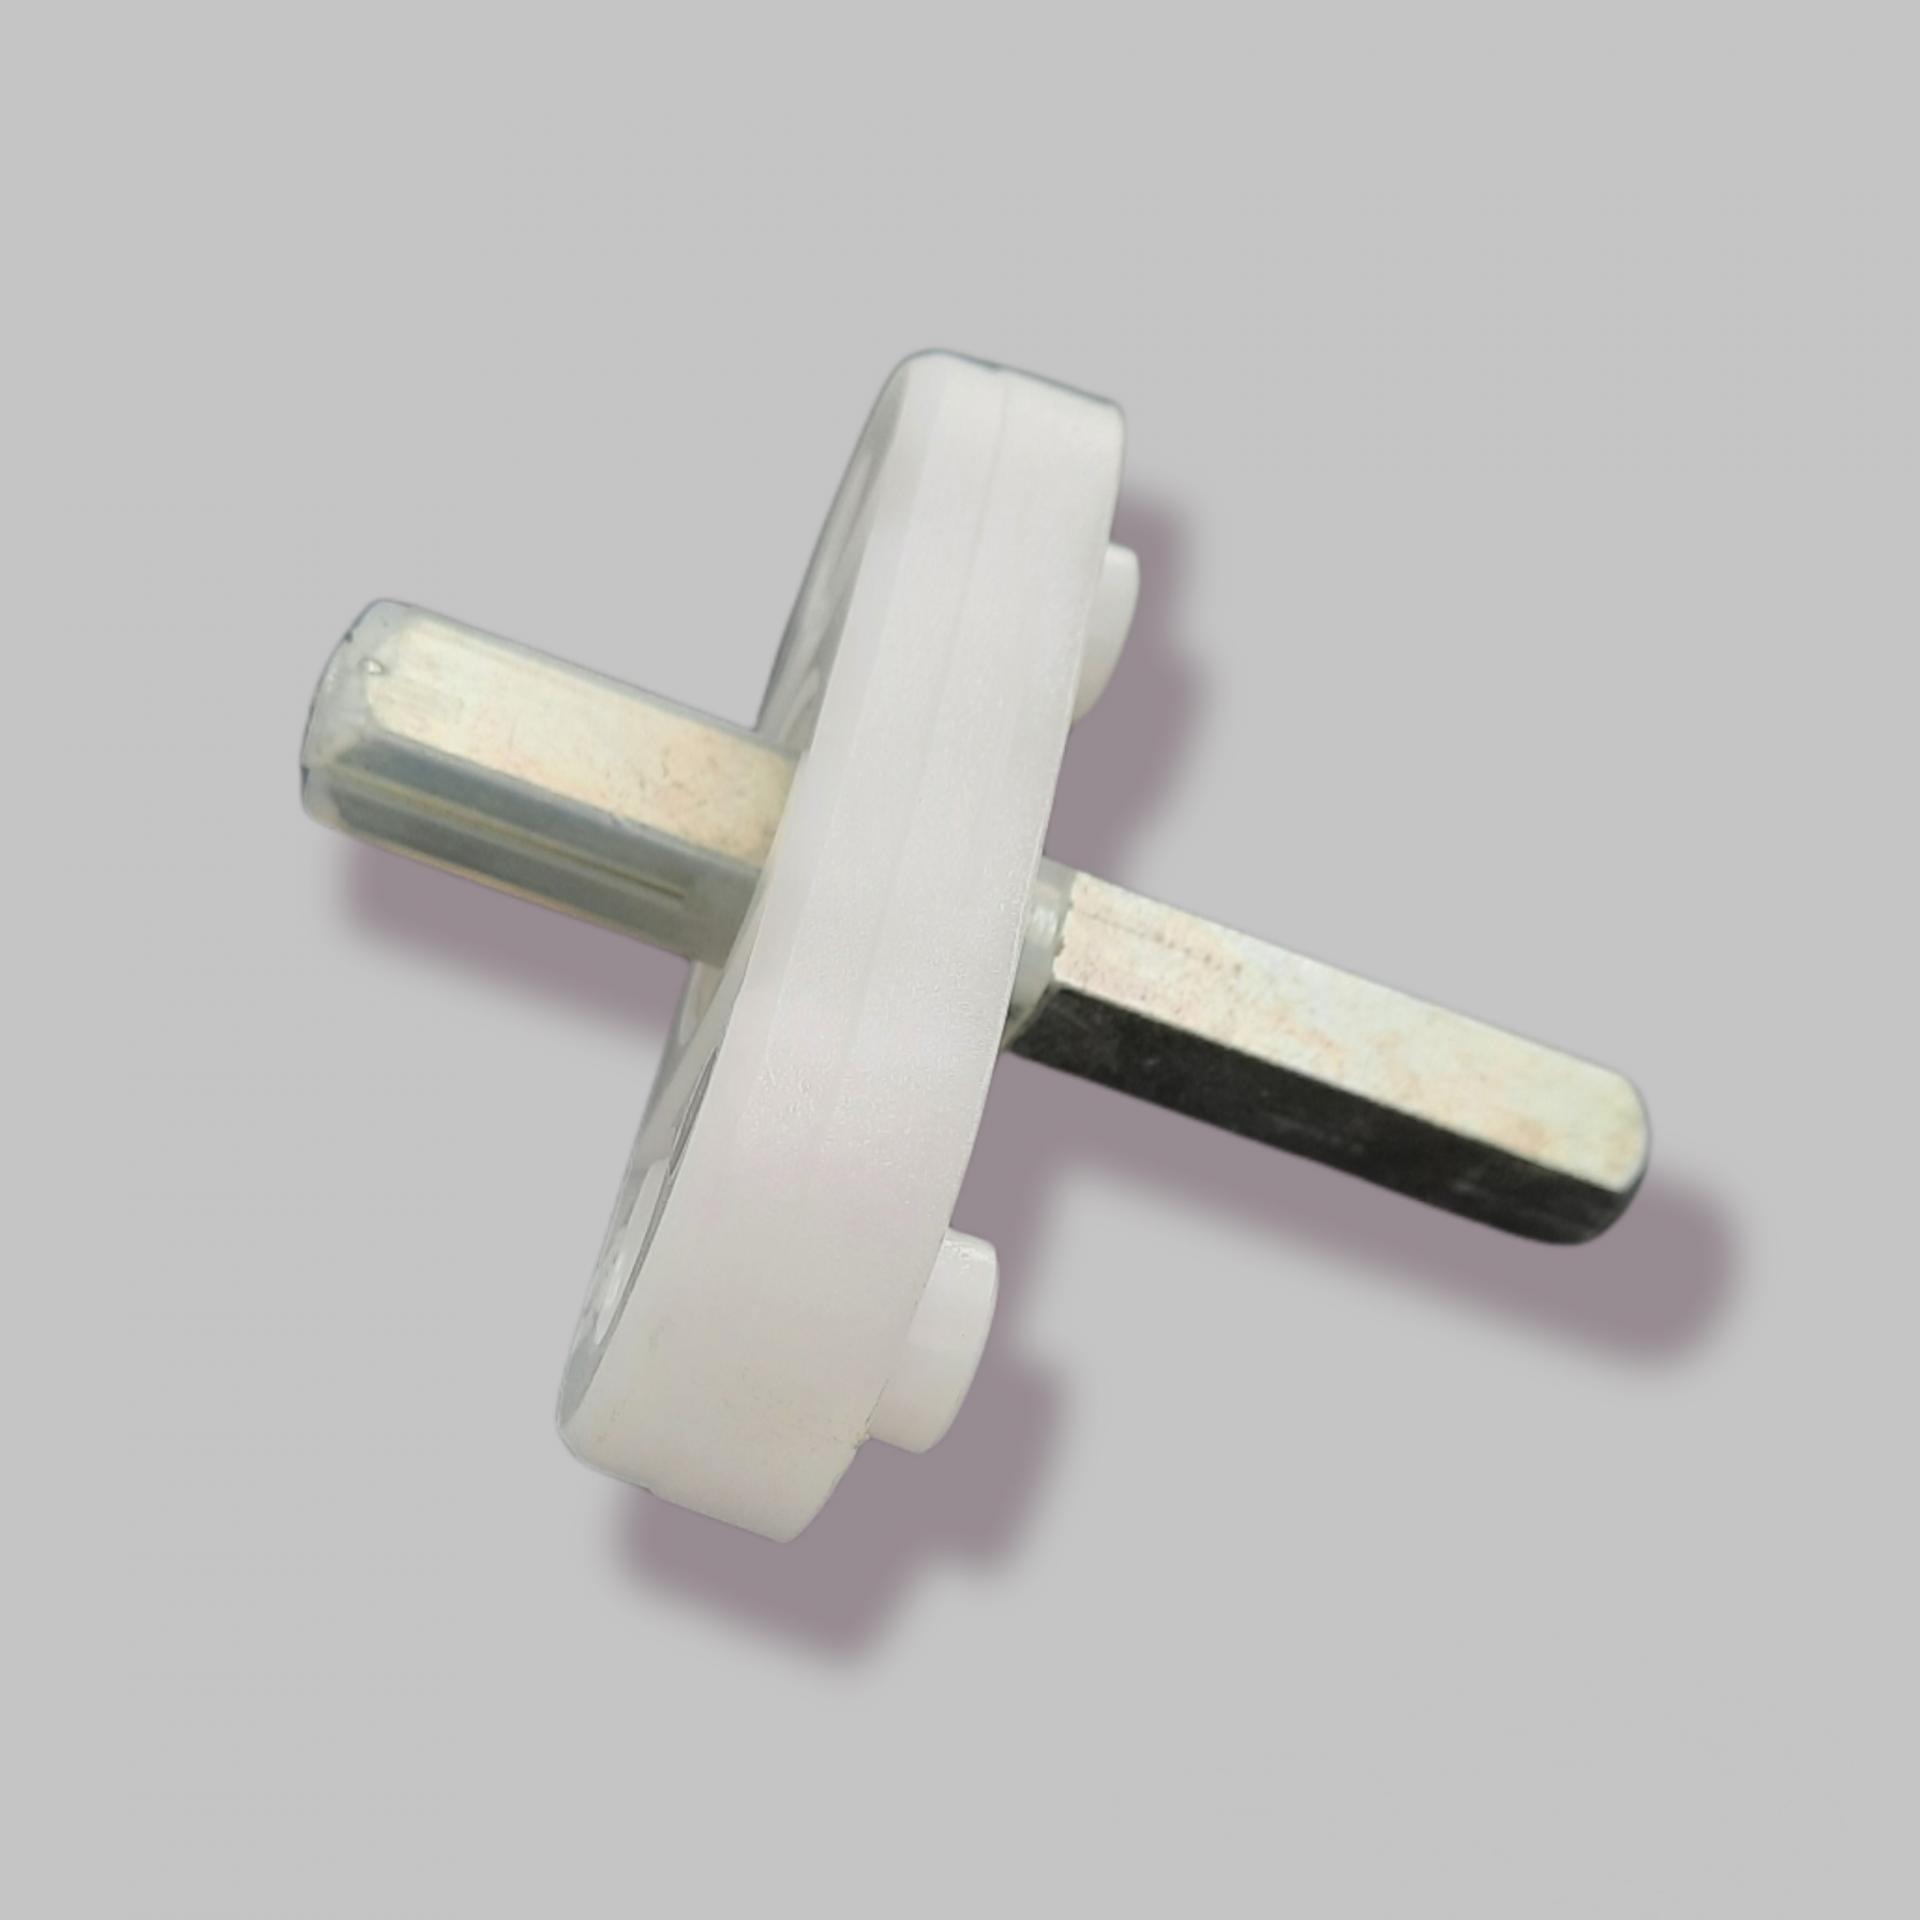 Tilt and turn rose with square spindle for window handle